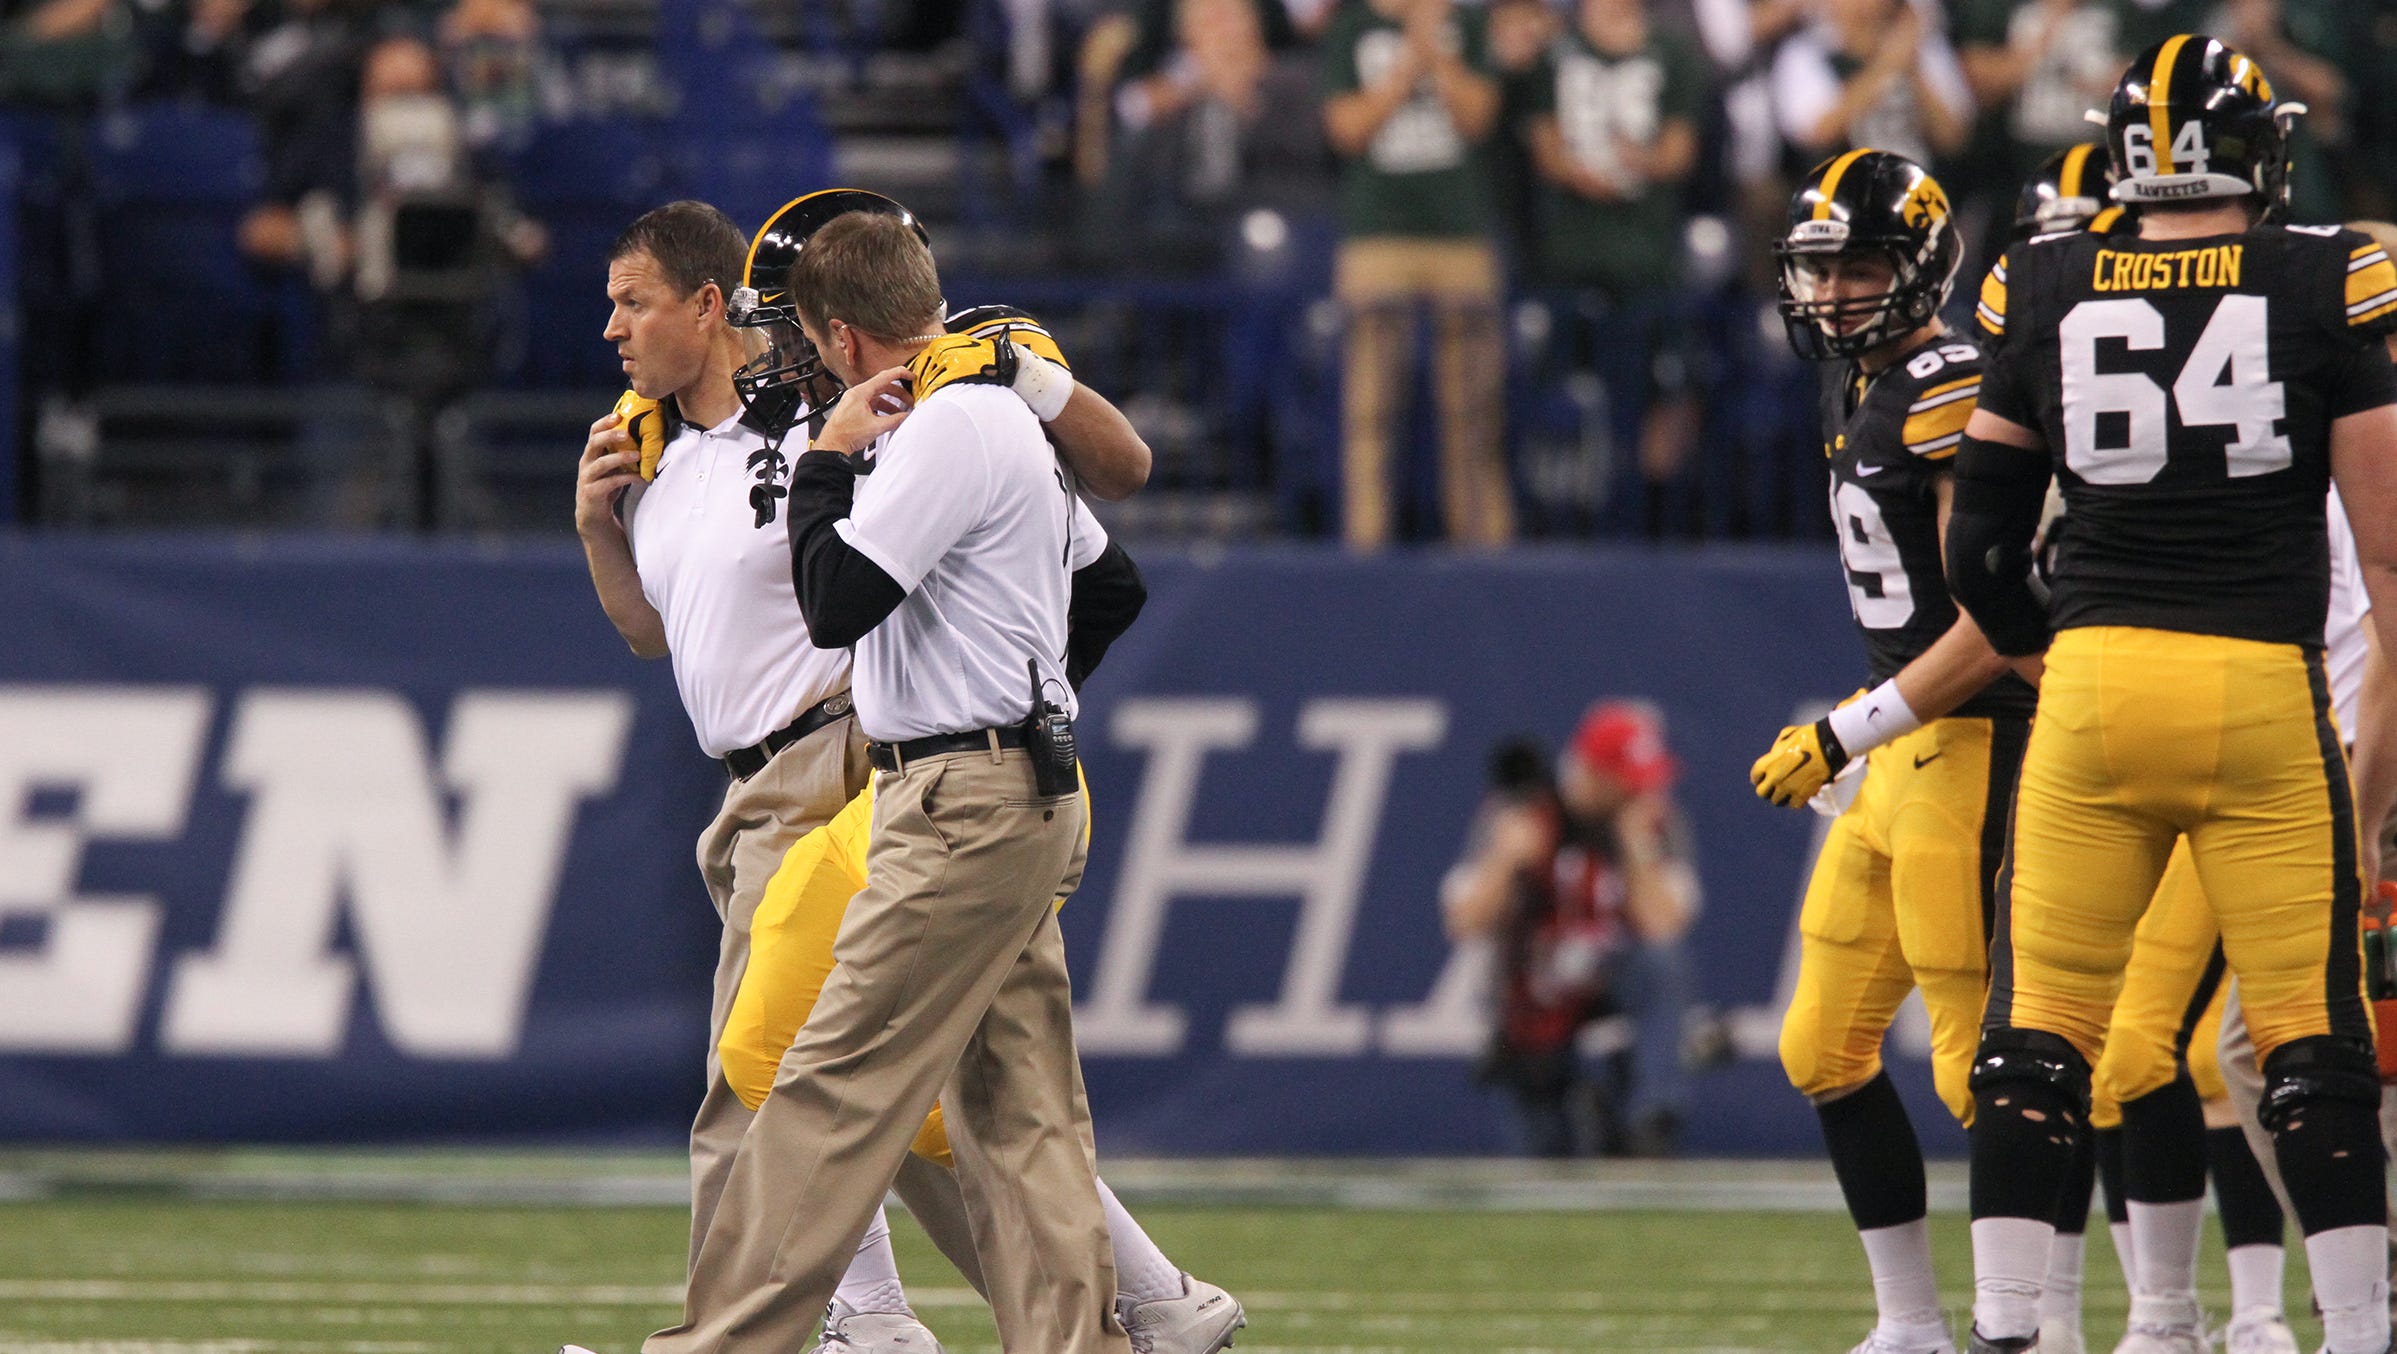 Iowa staff helps running back Jordan Canzeri off the field during the Hawkeyes' Big Ten Championship game against Michigan State at Lucas Oil Stadium in Indianapolis, Ind. on Saturday, Dec. 5, 2015.